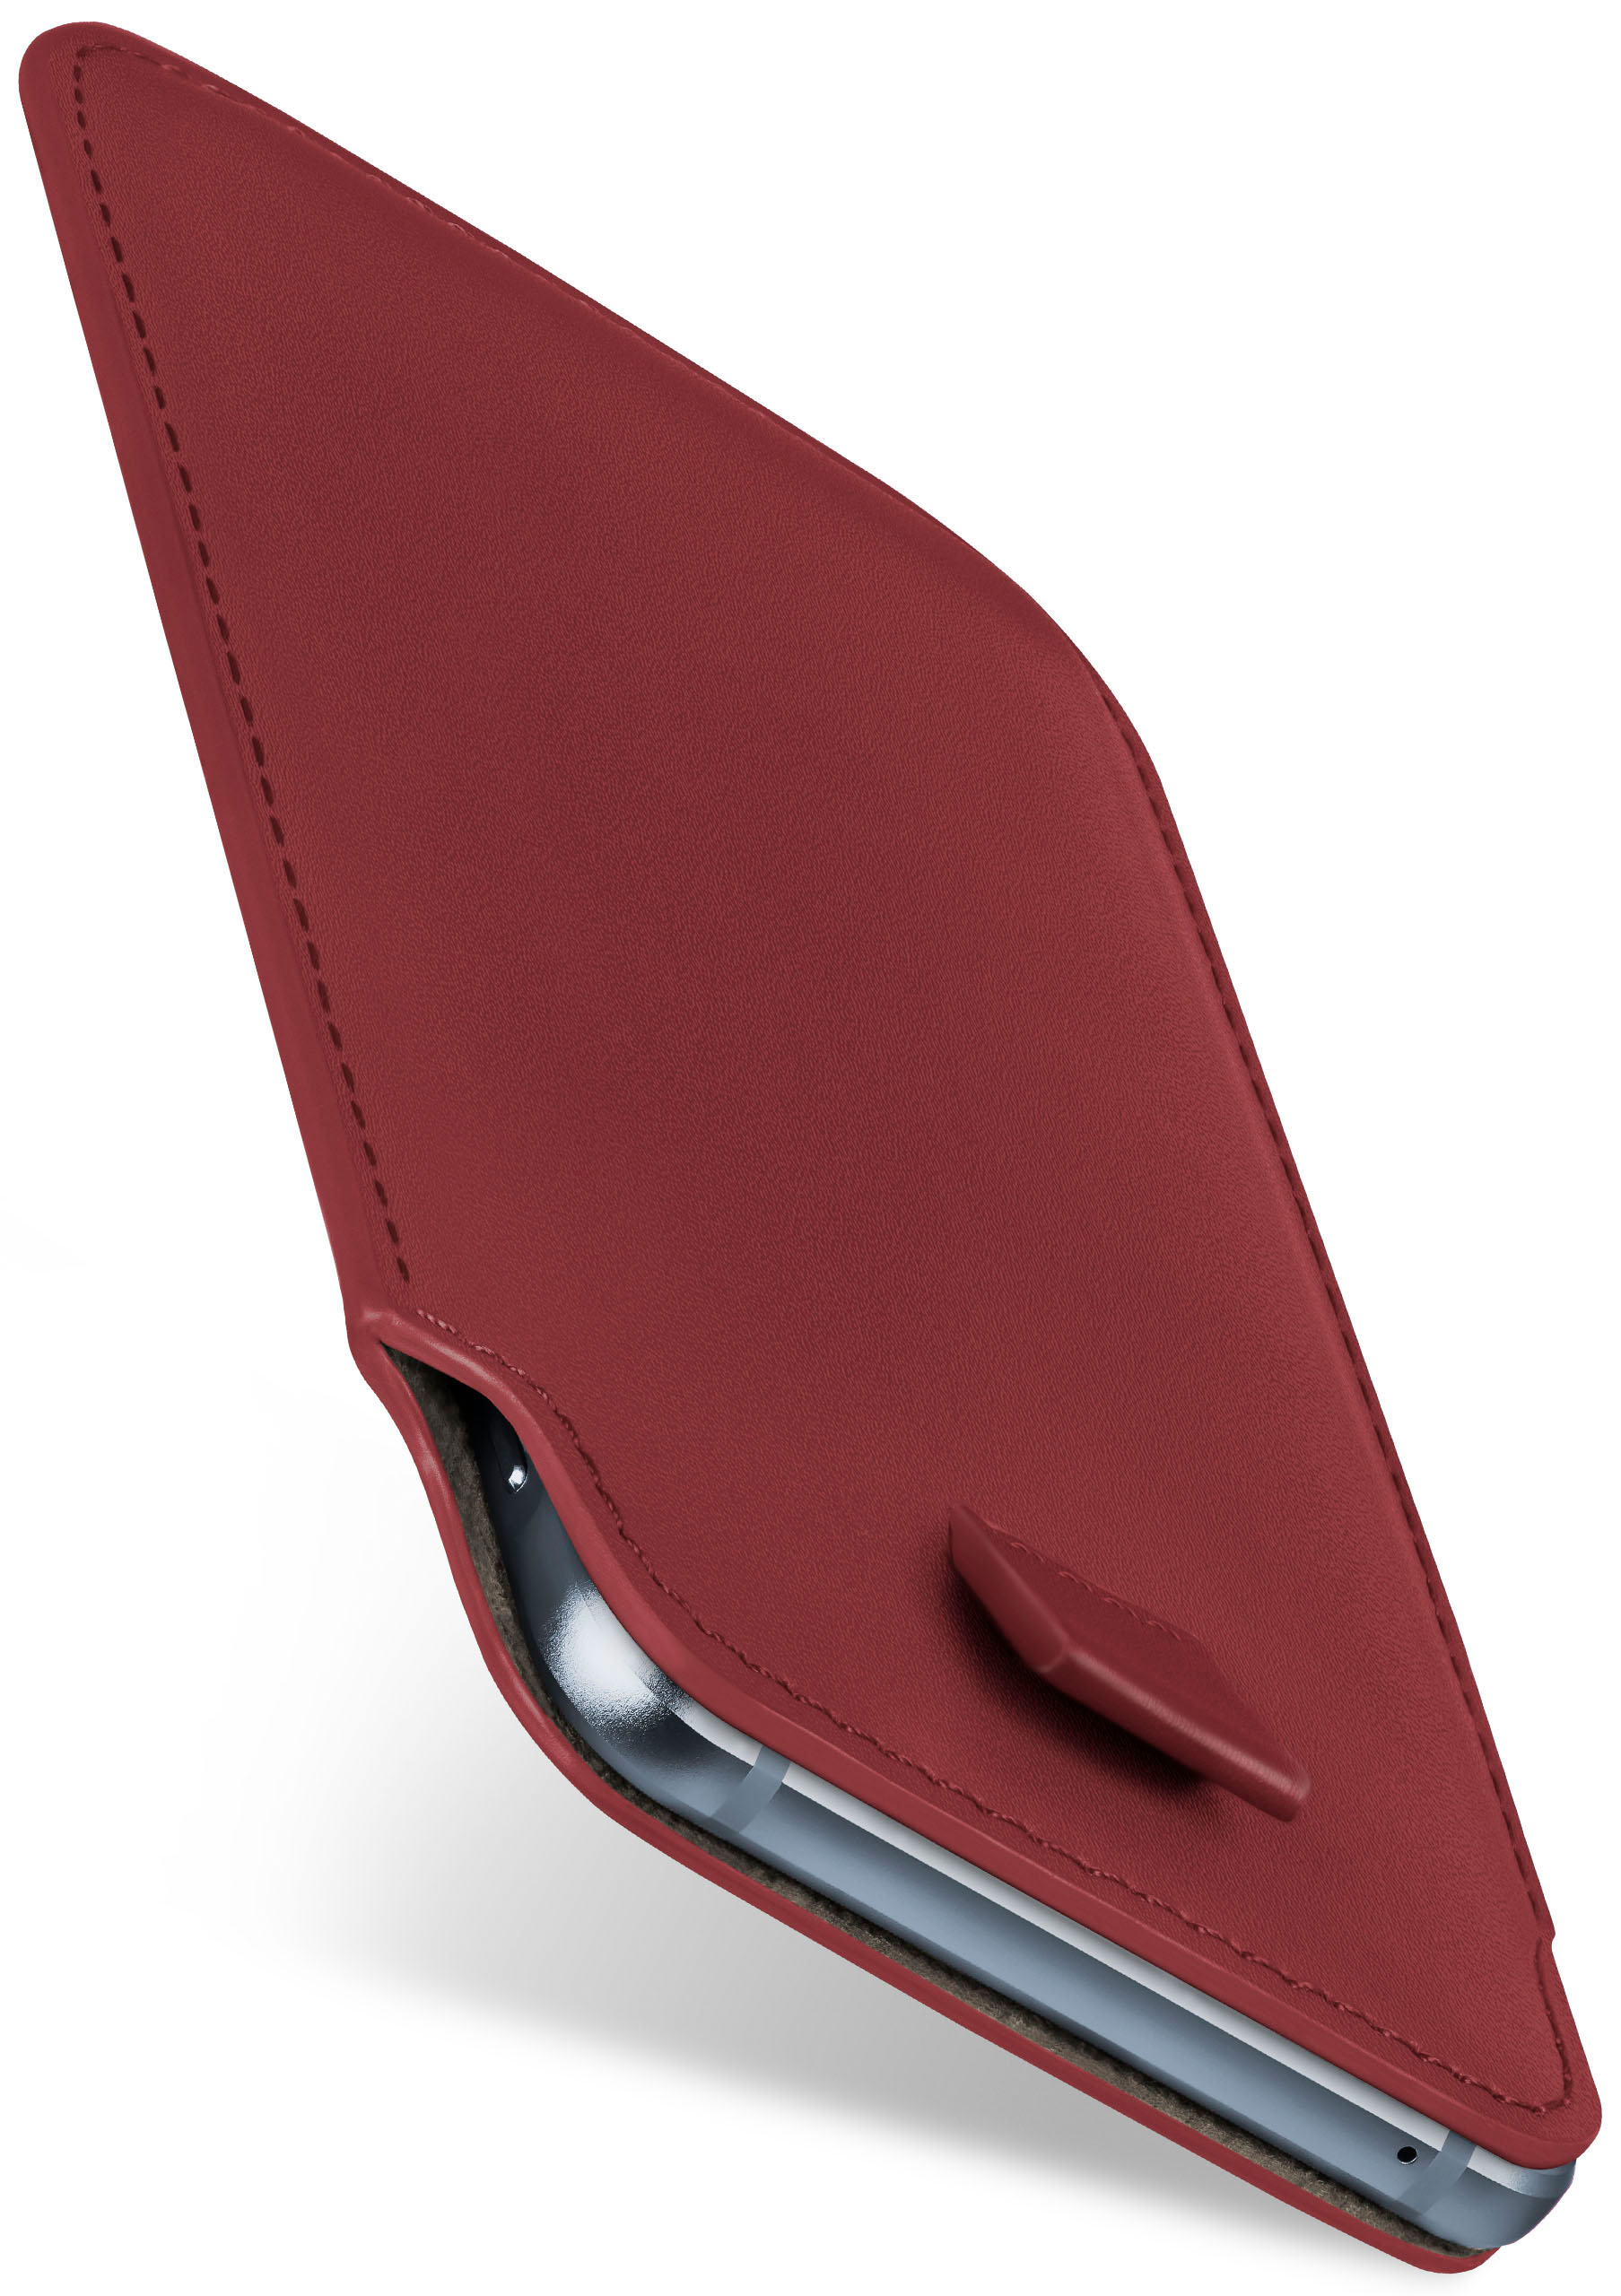 Compact, Case, Maroon-Red Slide MOEX Cover, XZ2 Xperia Full Sony,